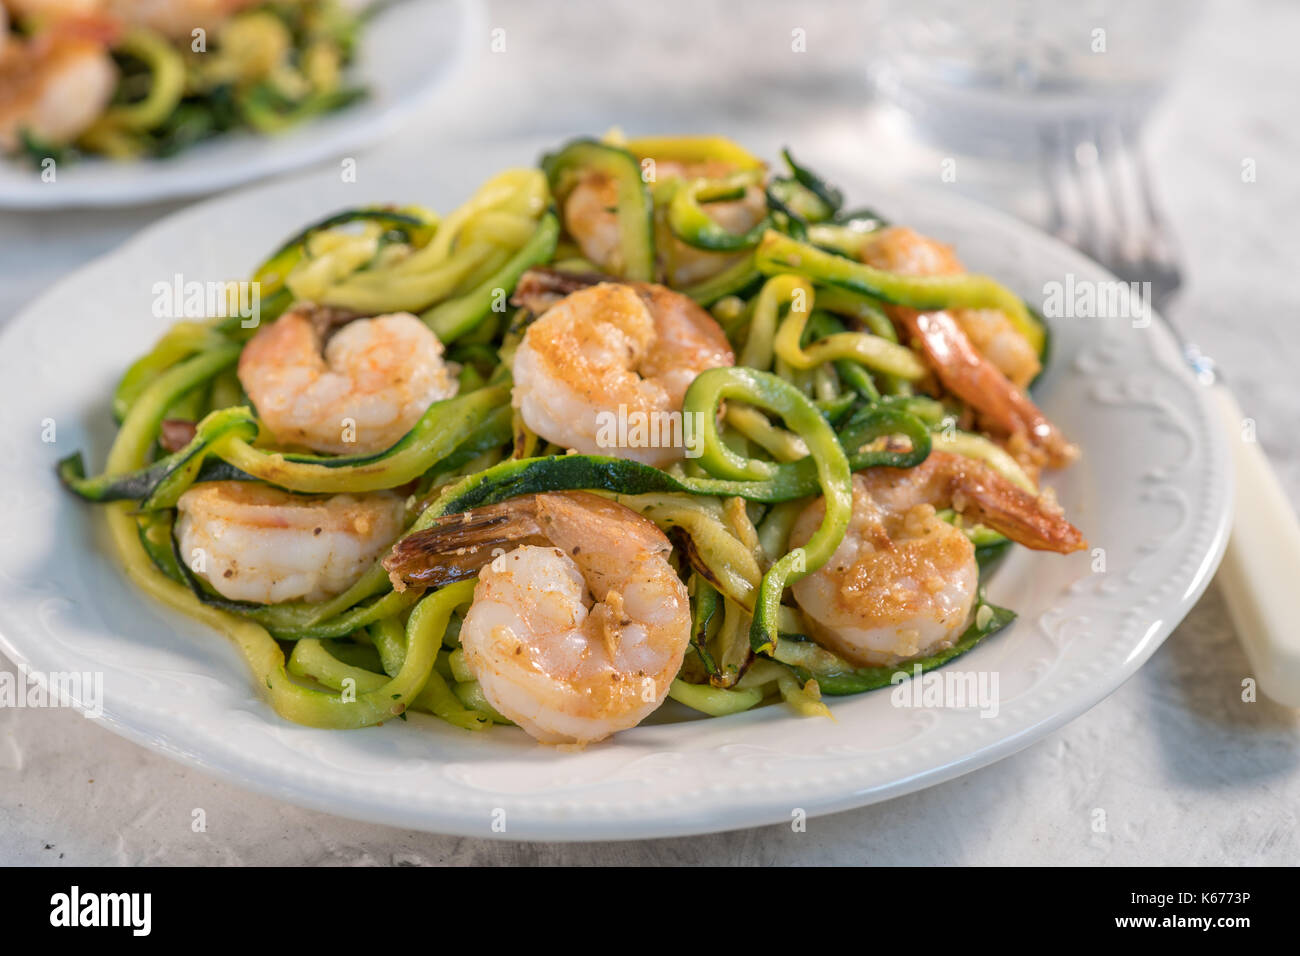 Skinny Shrimp Scampi with Zucchini Noodles. Low carb meal Stock Photo